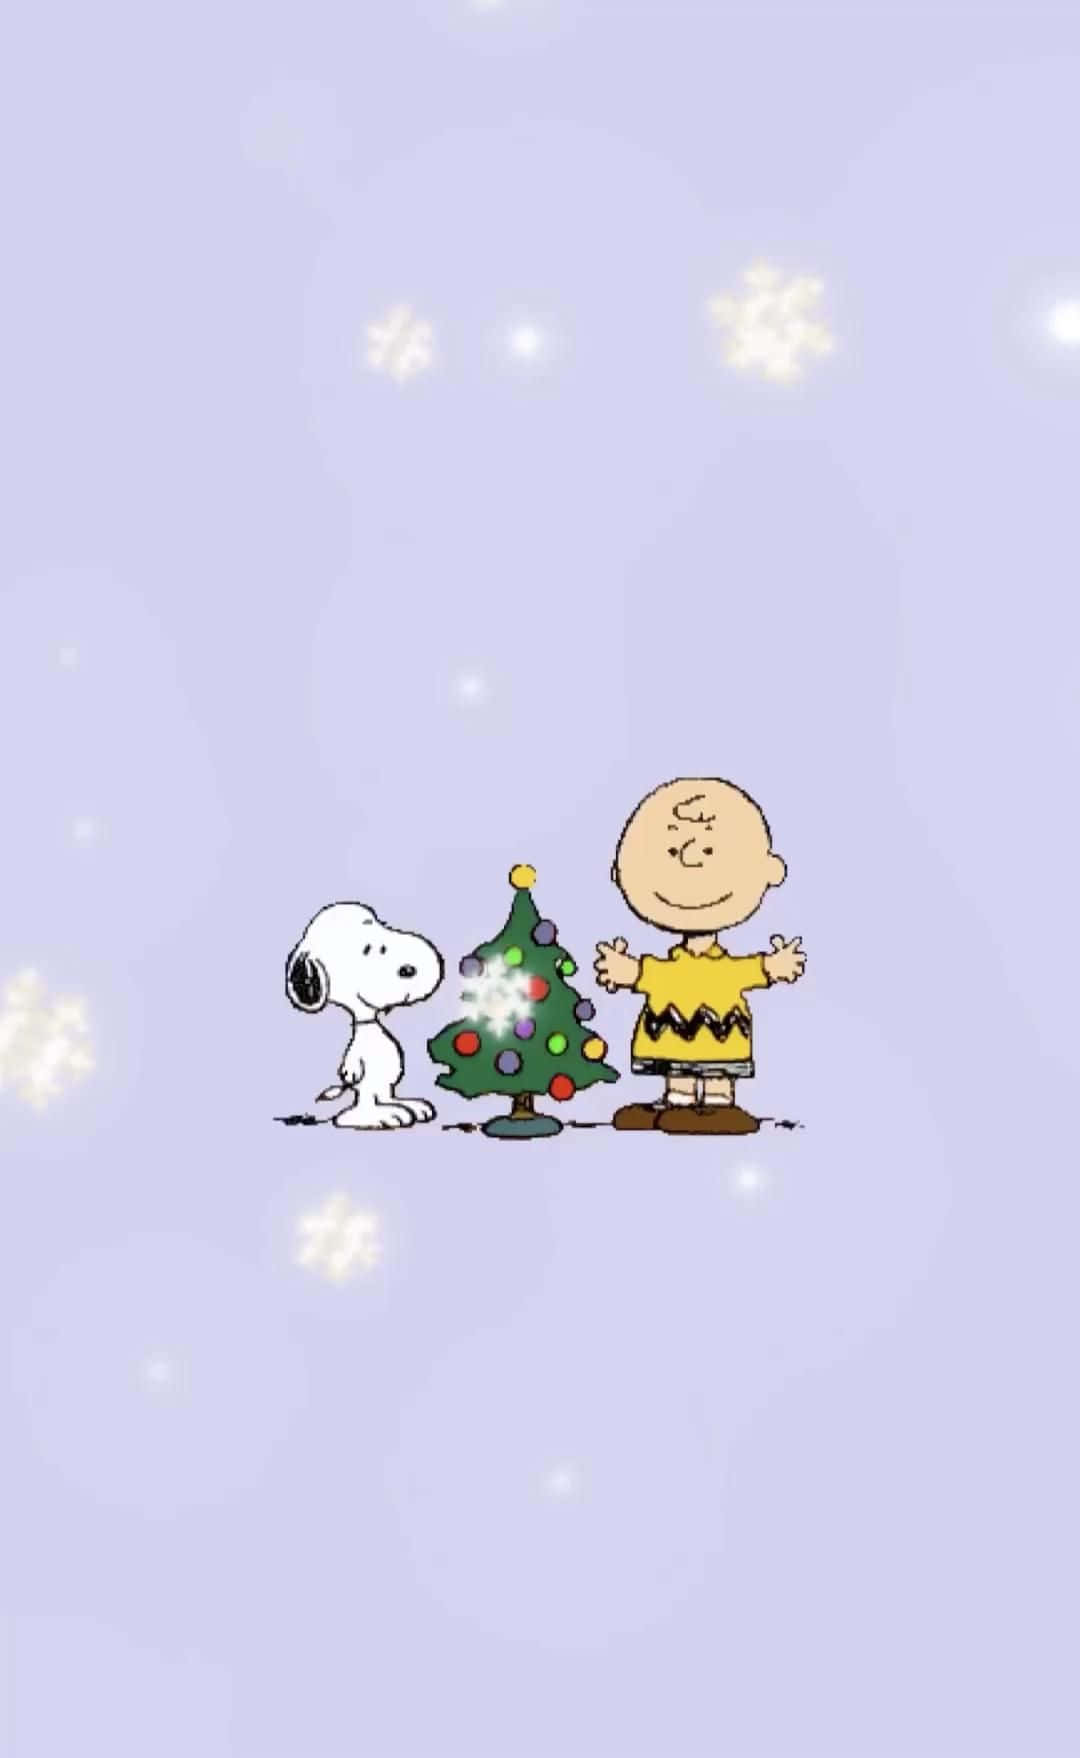 Download Cute Snoopy Christmas Tree With Charlie Brown Wallpaper